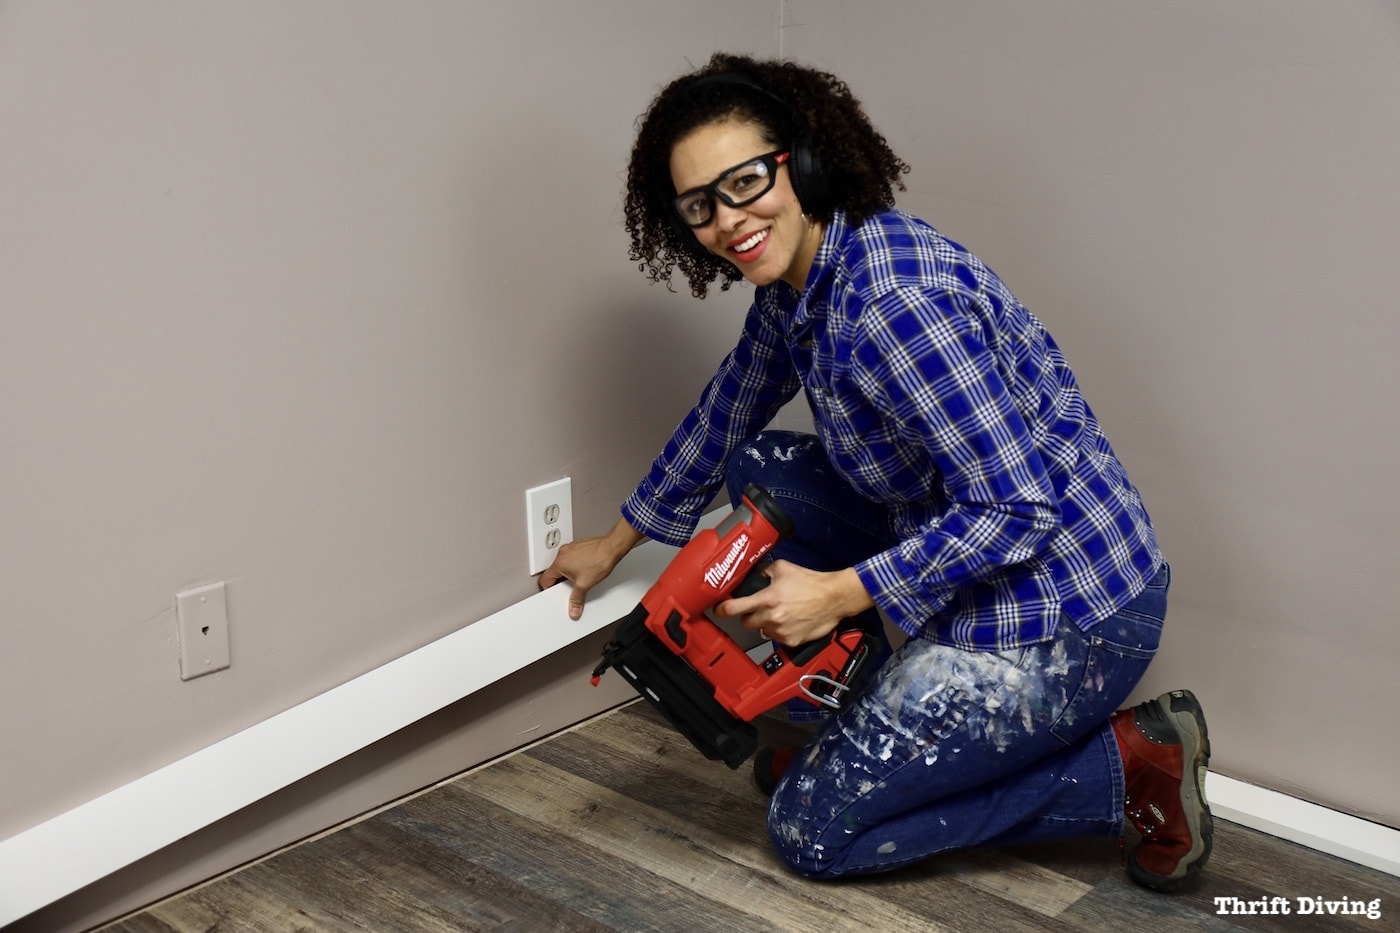 How To Install Pvc Baseboard In Bathroom How to Install Baseboard Yourself: A Step-by-Step Guide